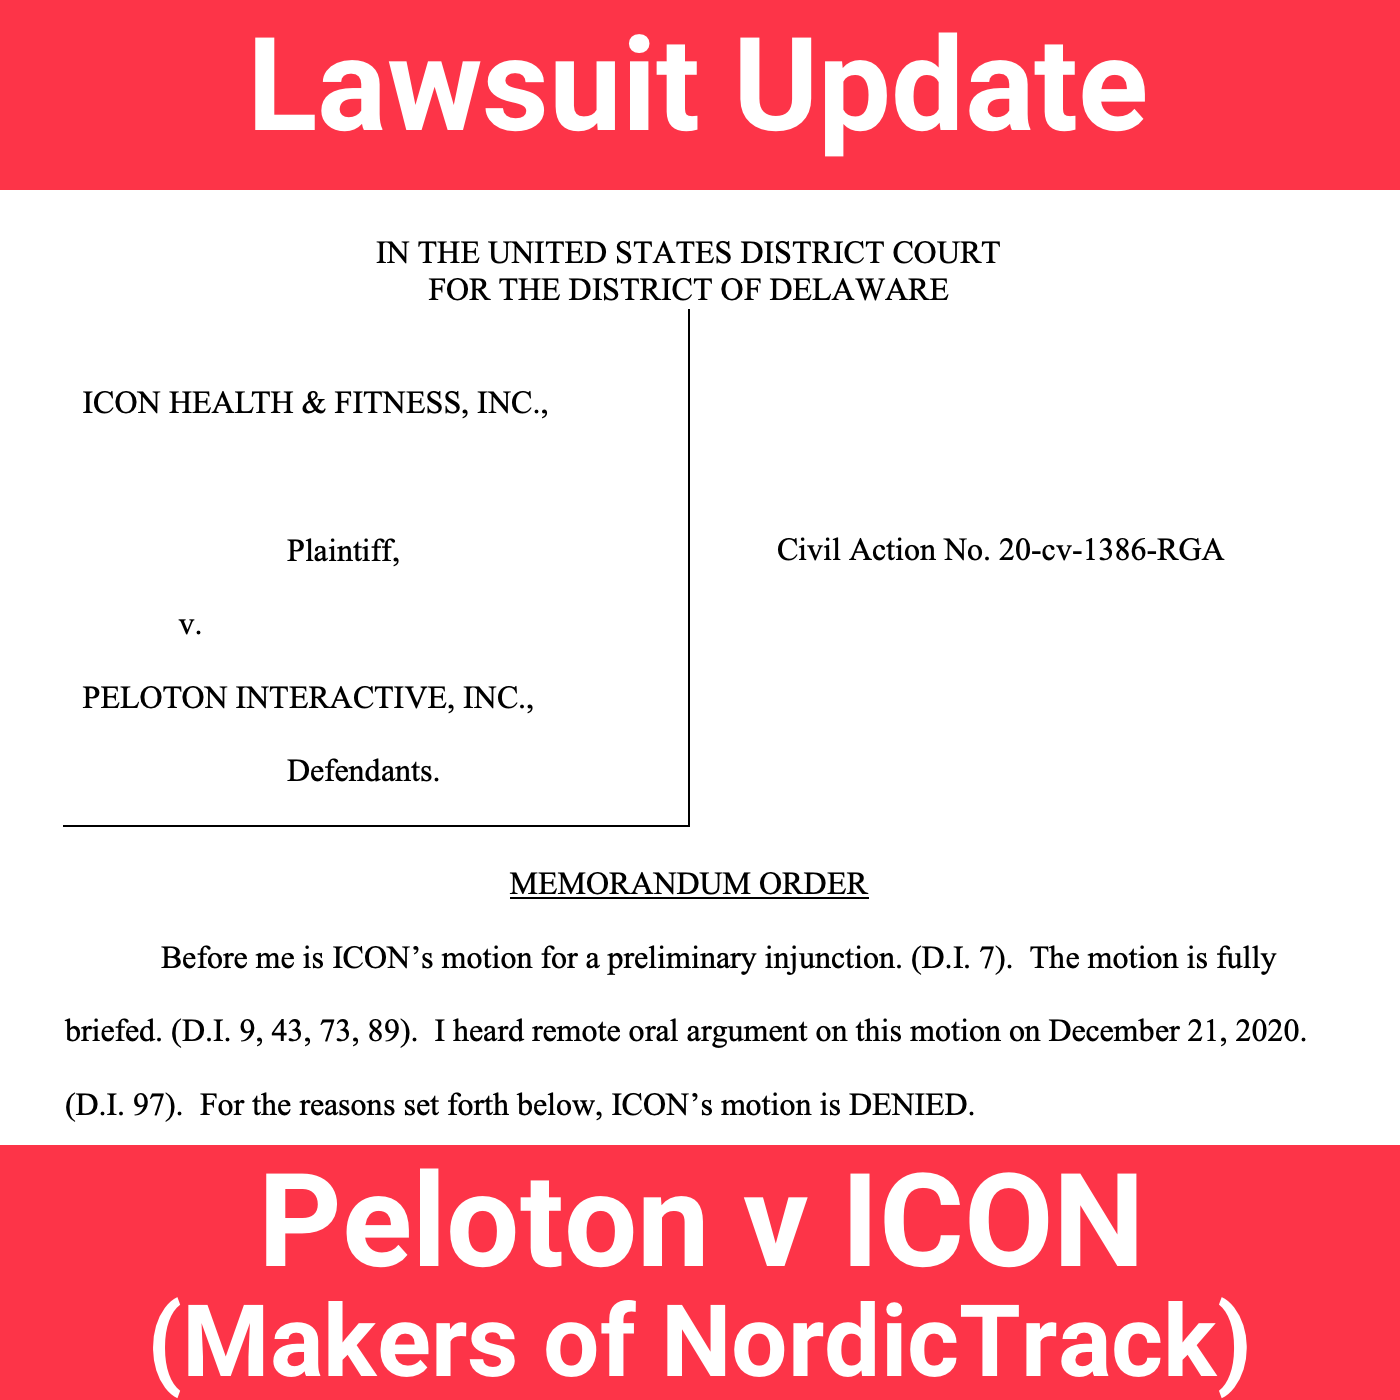 Peloton Vs Nordictrack Icon Health Fitness Lawsuit Sales Of Bike Allowed To Continue For Now Peloton Buddy